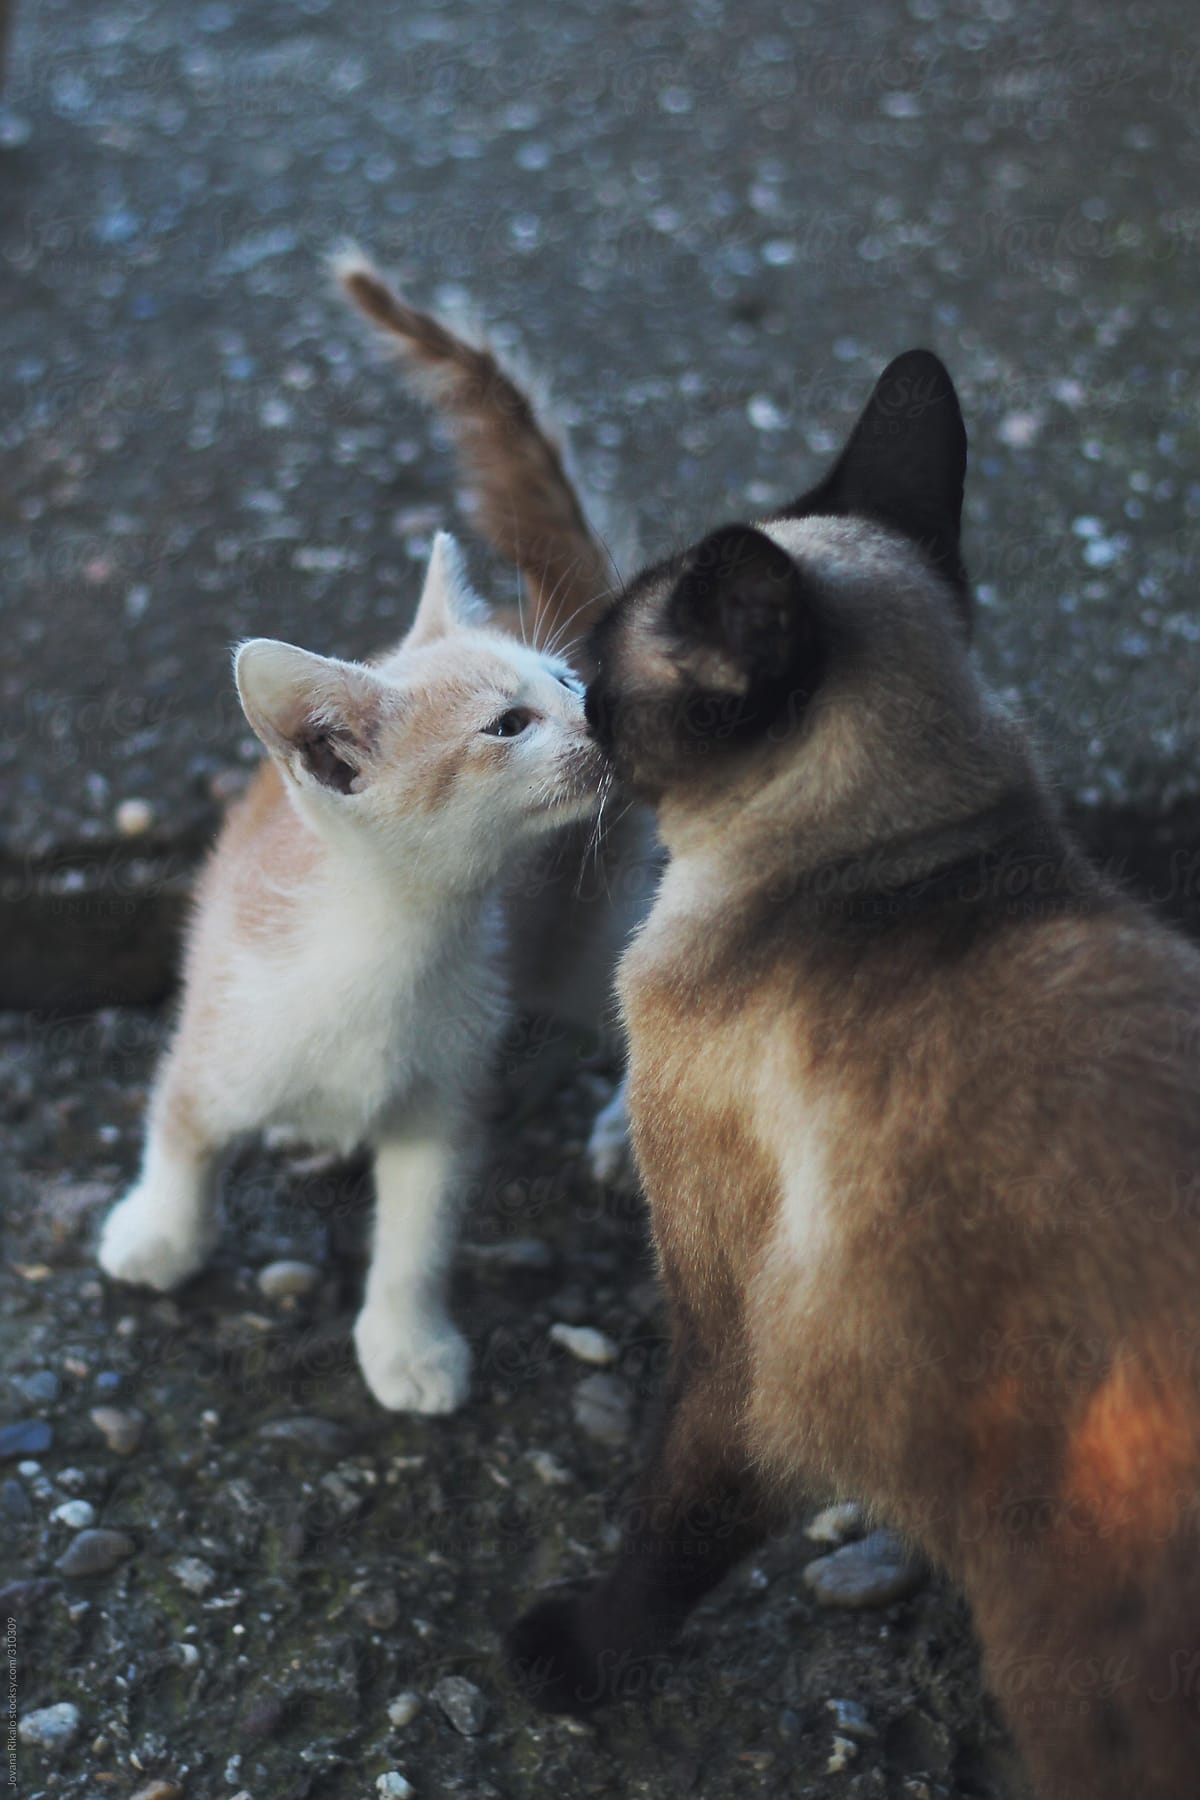 Cats Kissing Each Other